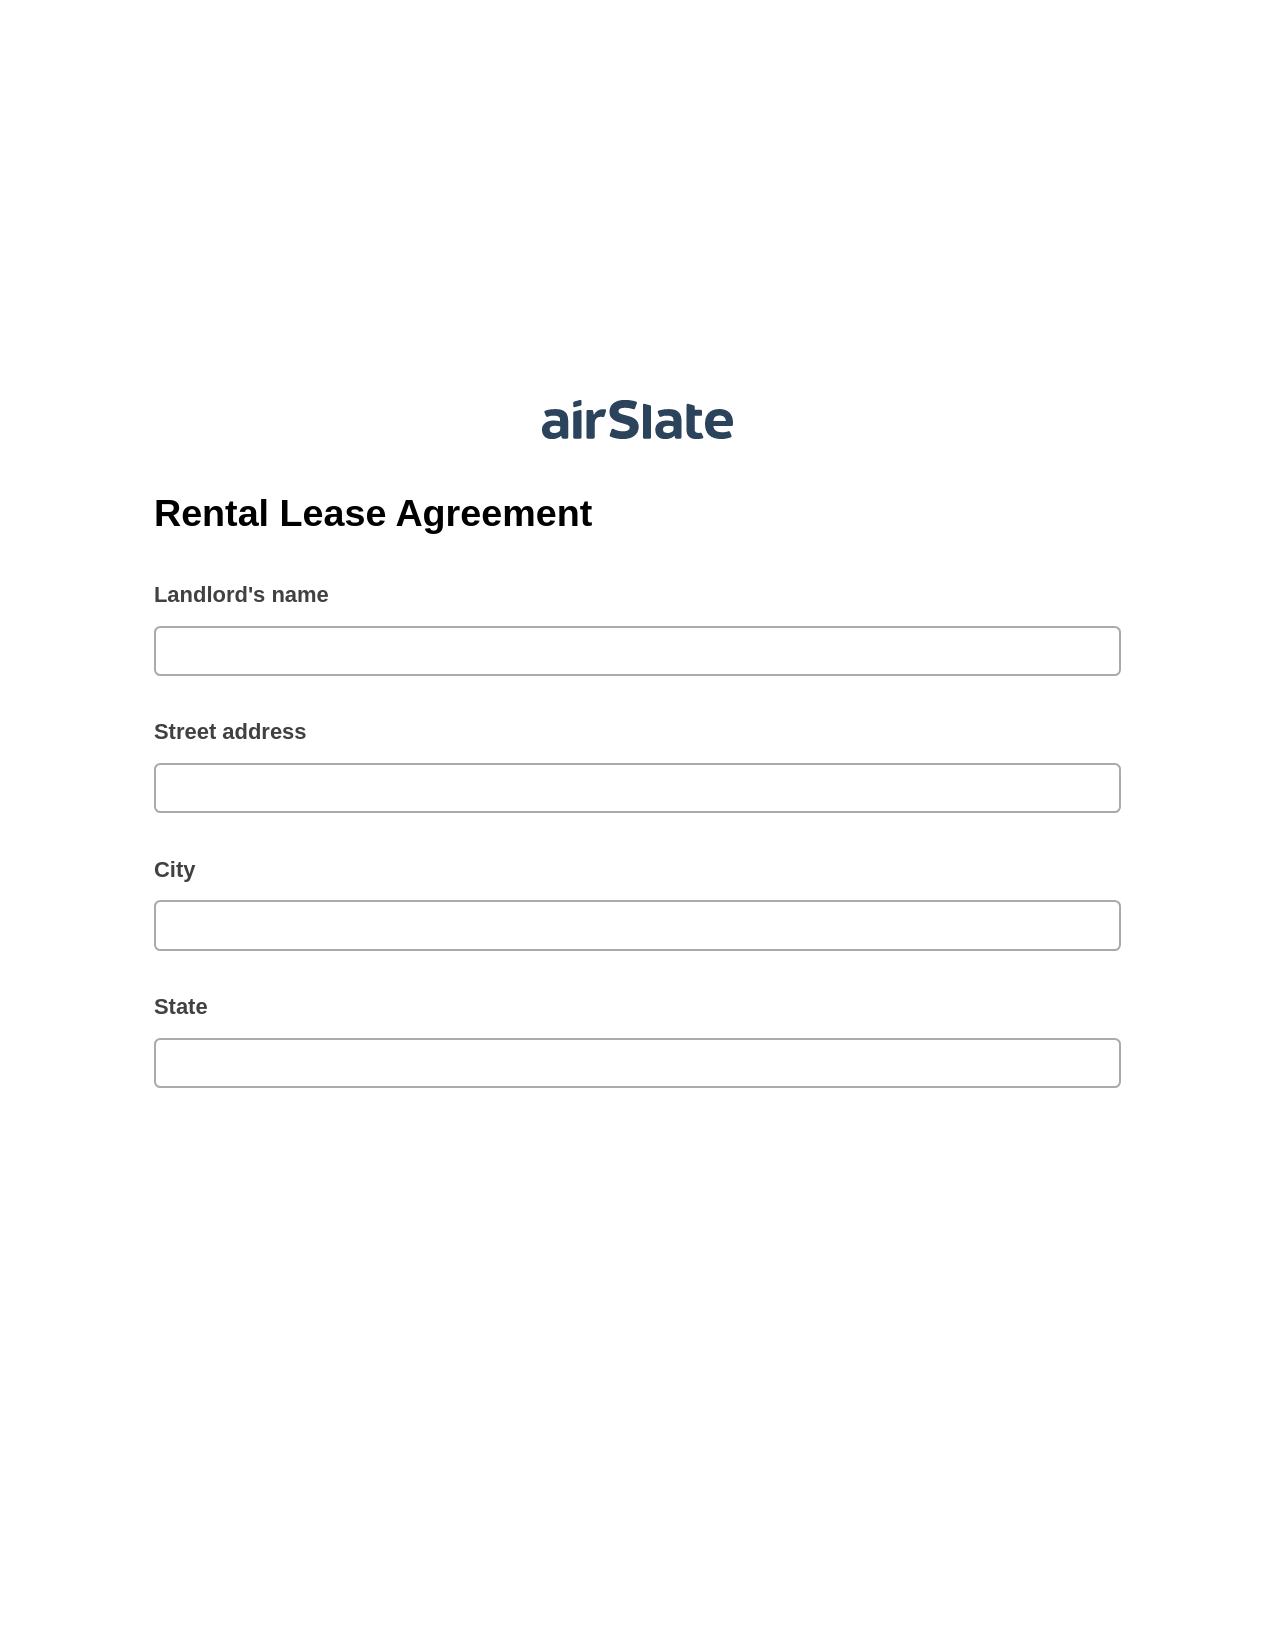 Rental Lease Agreement Pre-fill from MySQL Bot, Update NetSuite Records Bot, Export to NetSuite Record Bot